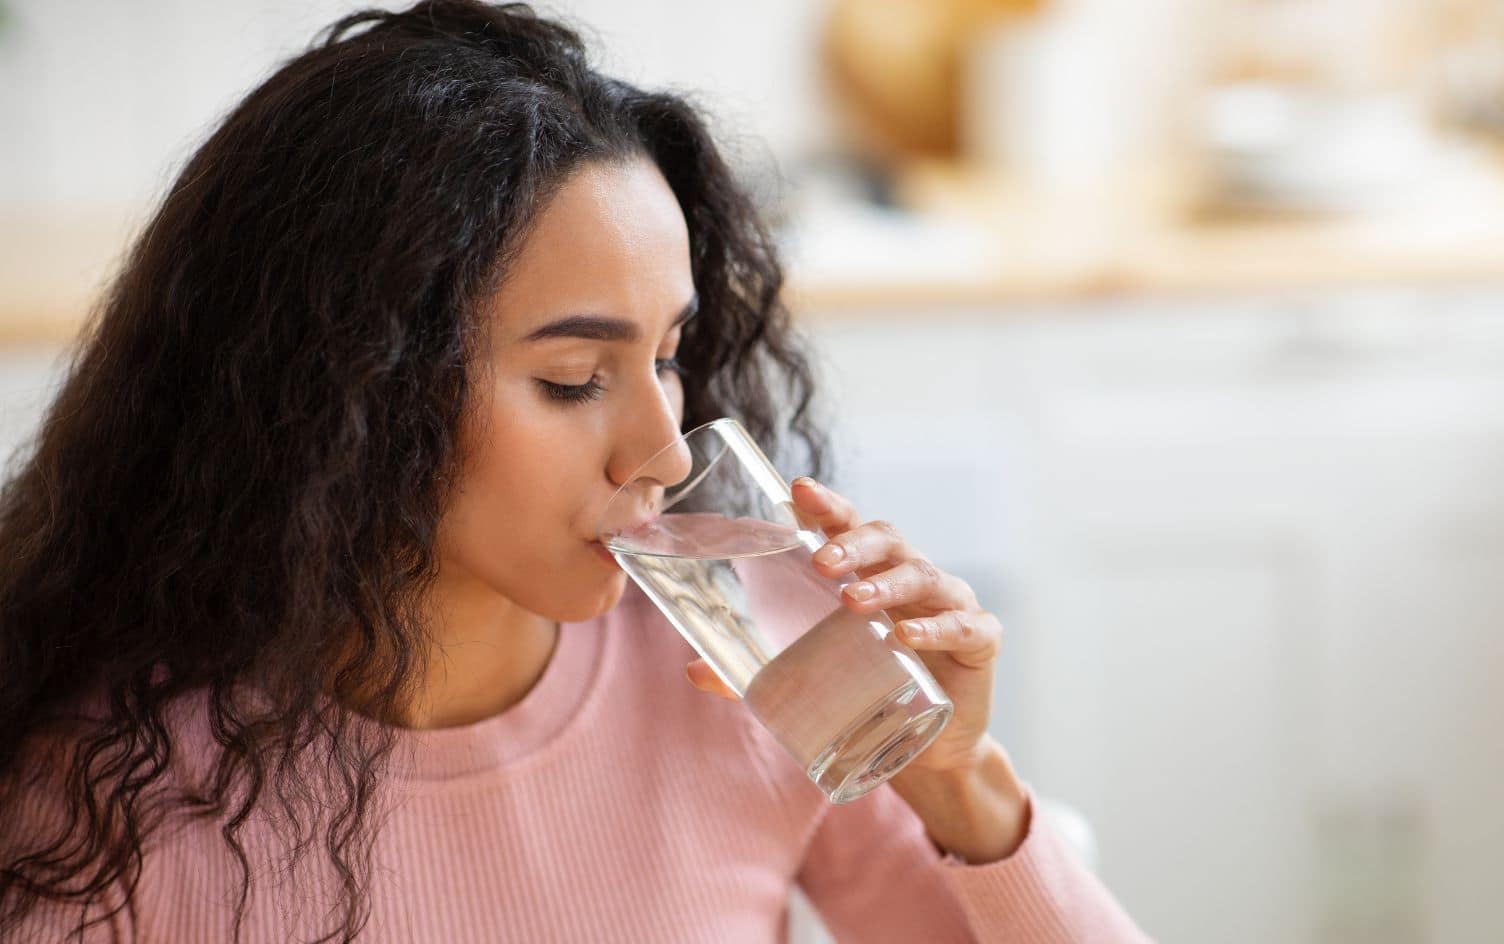 5 Smart and Simple Ways to Stay Hydrated